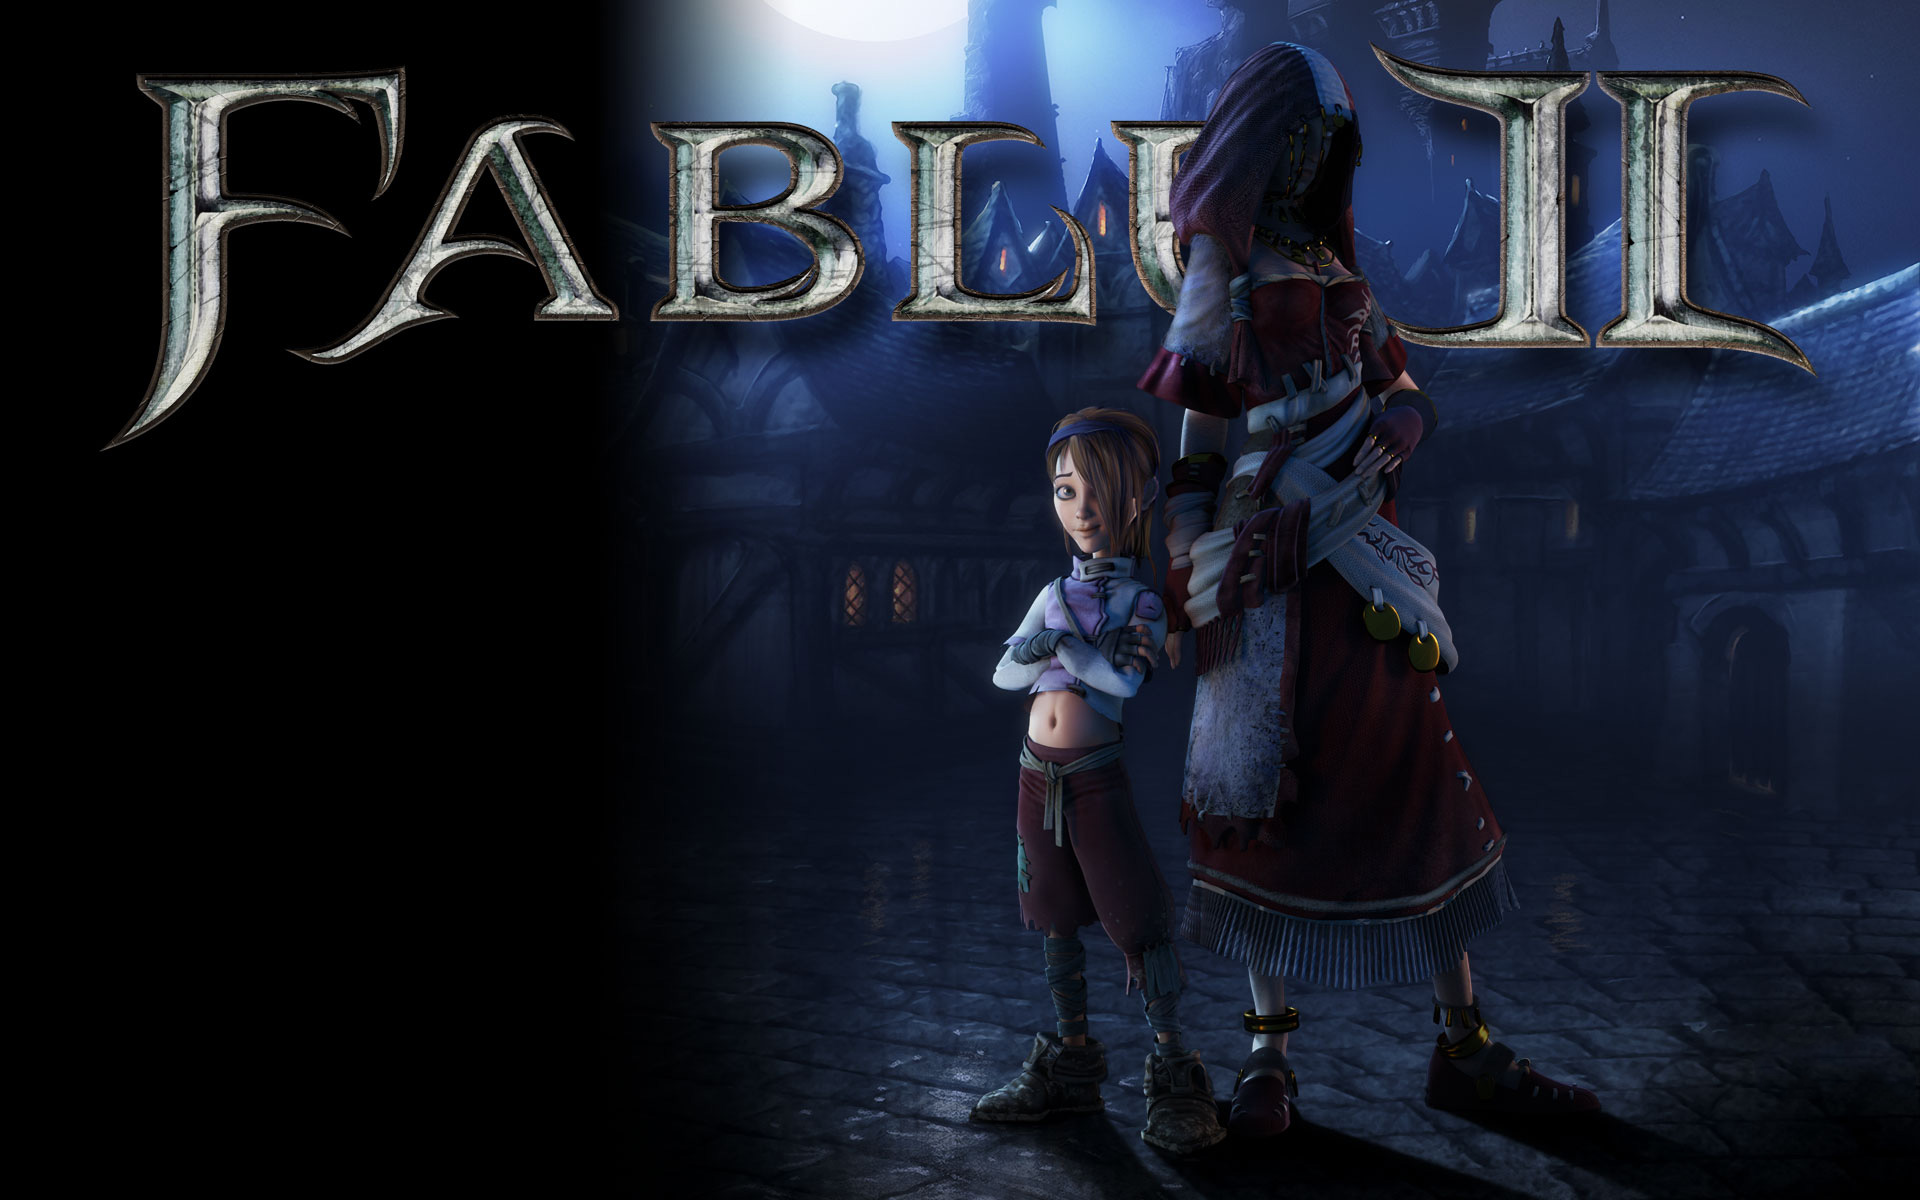 Потрясе 2 ы. Fable 2. Fable 2 (2008). Fable 2 Постер. Fable 2 обои.